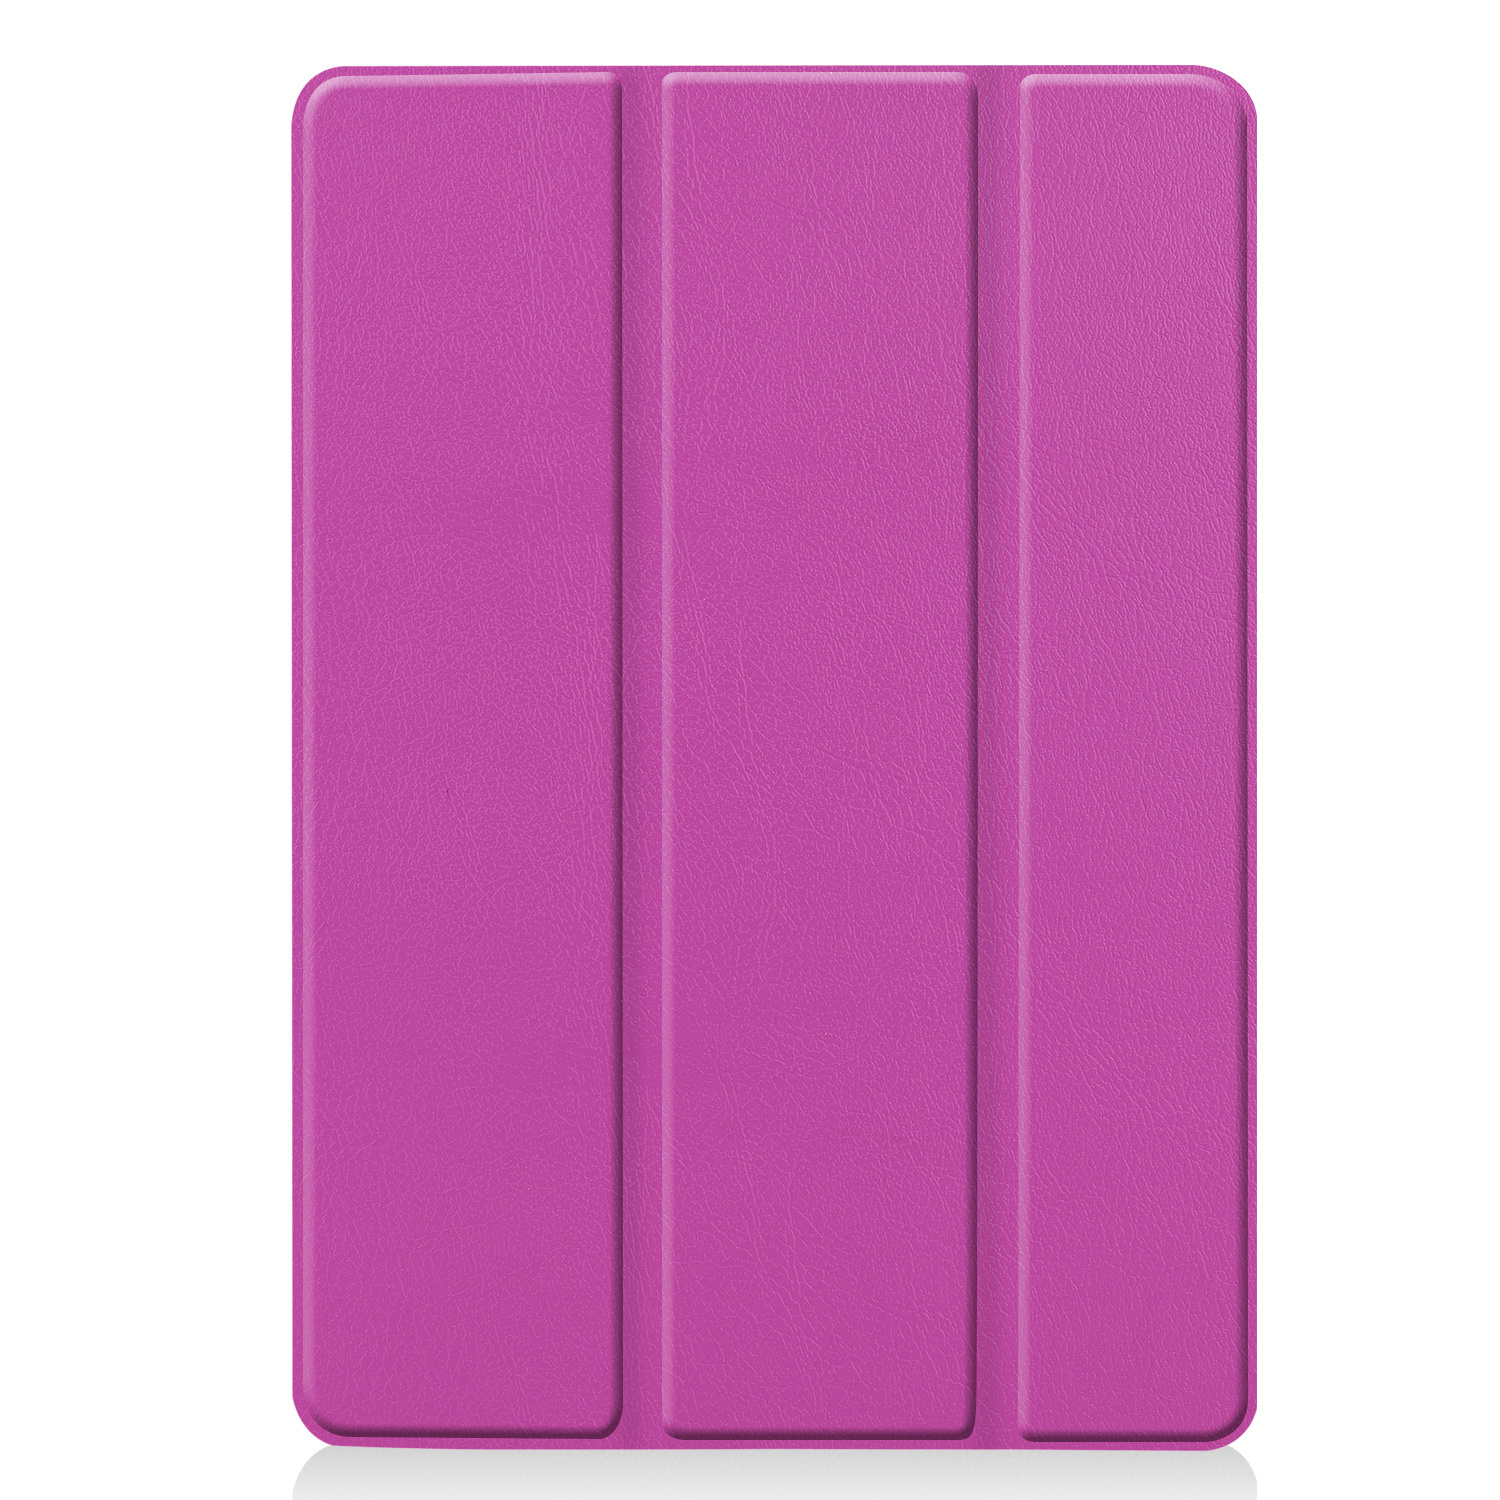 Nomfy iPad 10.2 2019 Hoesje Book Case Hoes - iPad 10.2 2019 Hoes Hardcover Case Hoesje - Paars